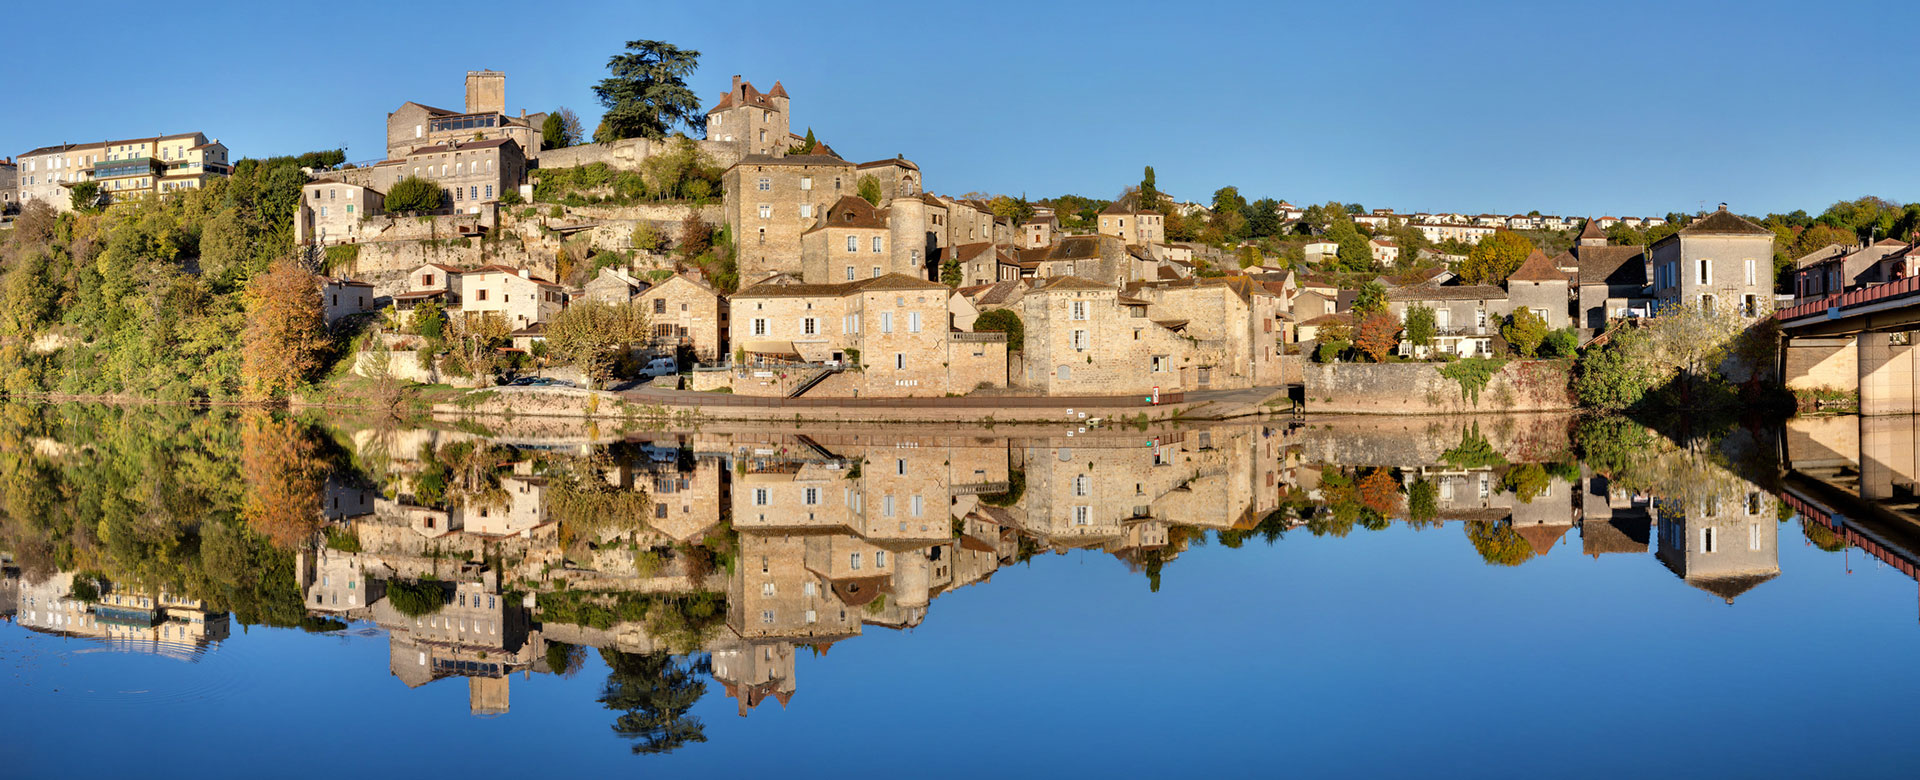 Famous sites of Occitanie located nearby the campsite in Quercy